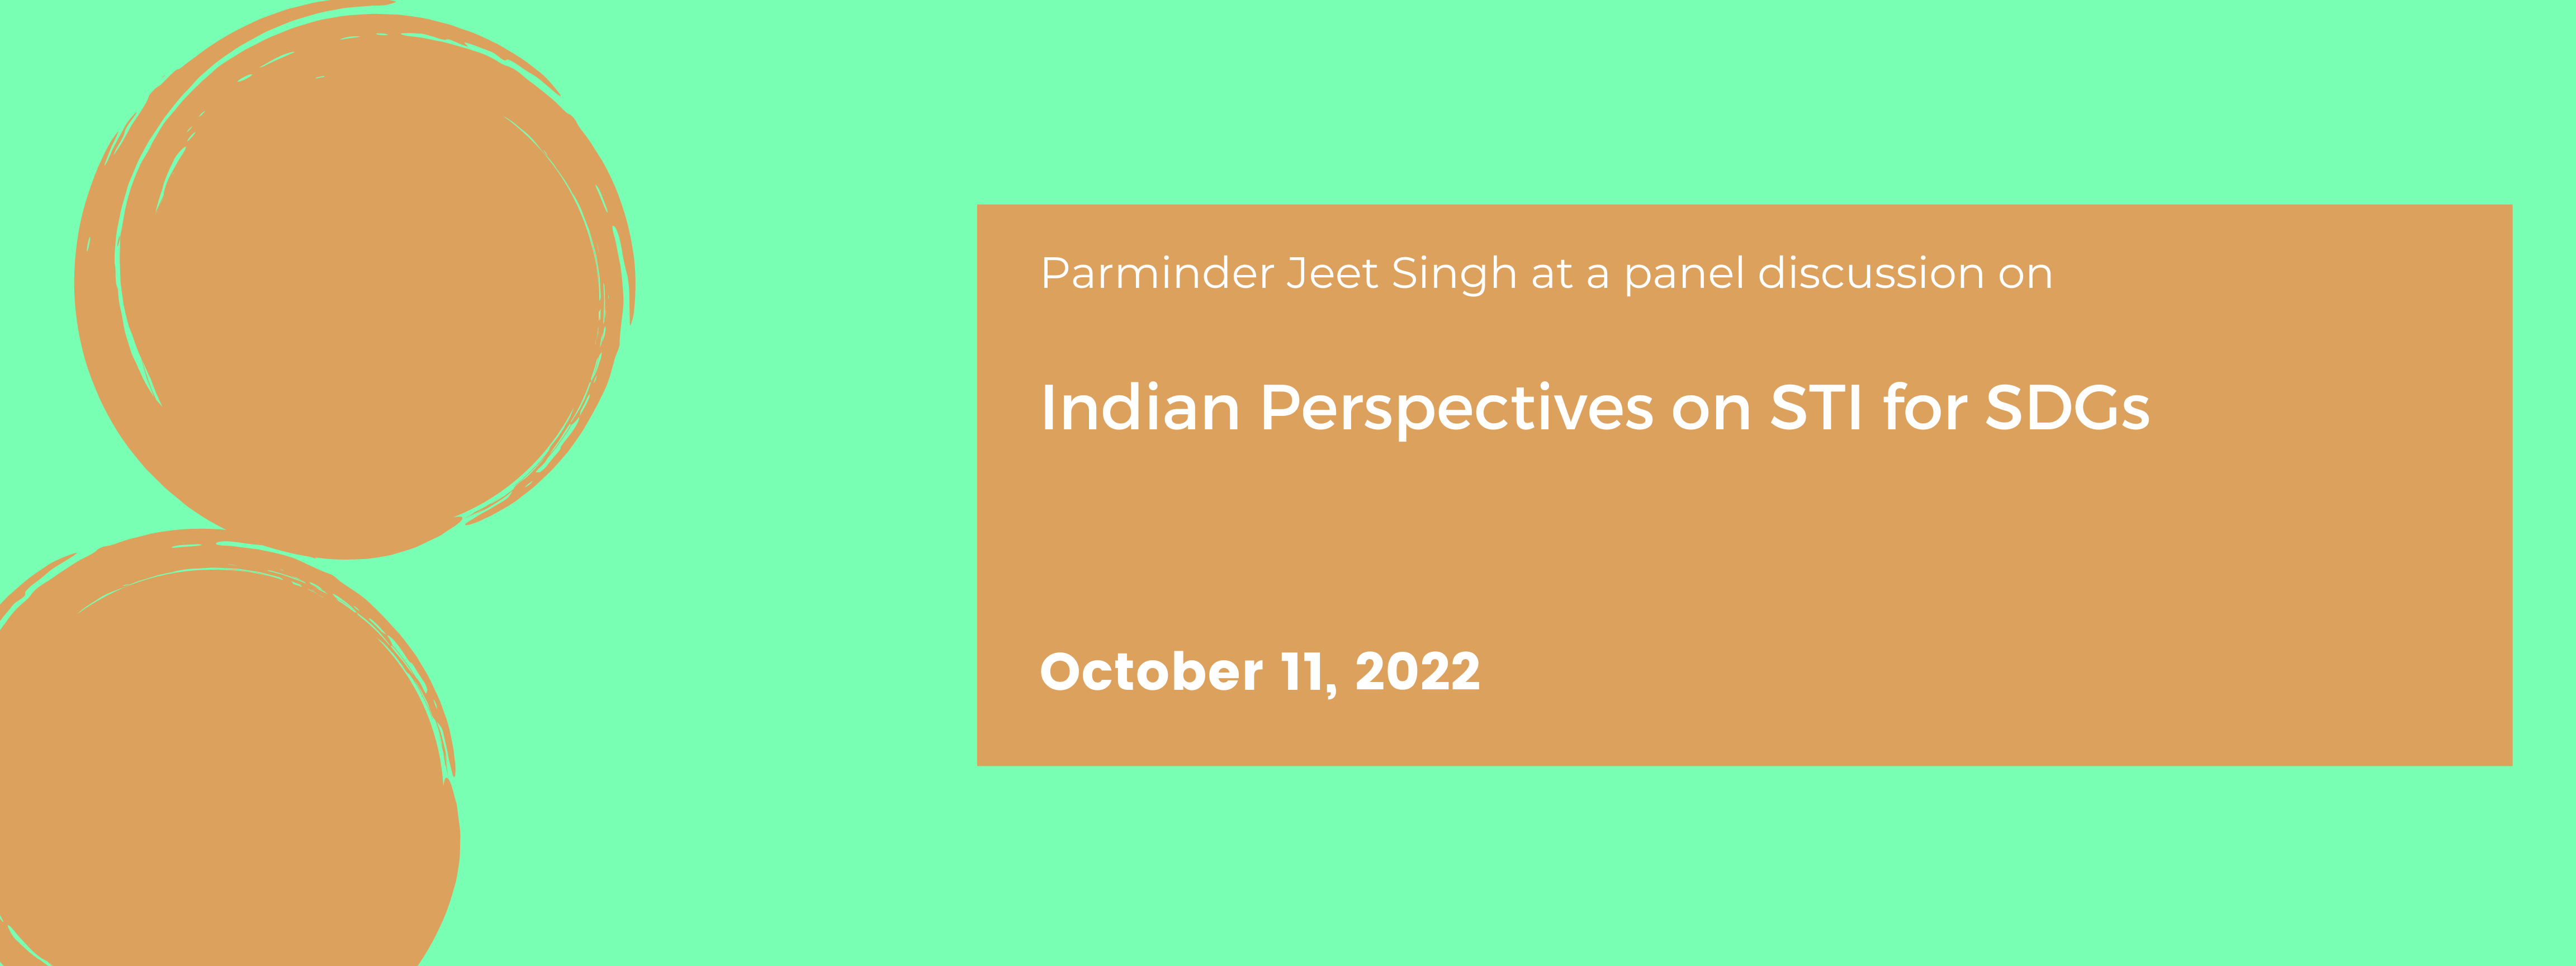 Indian Perspectives on STI for SDGs